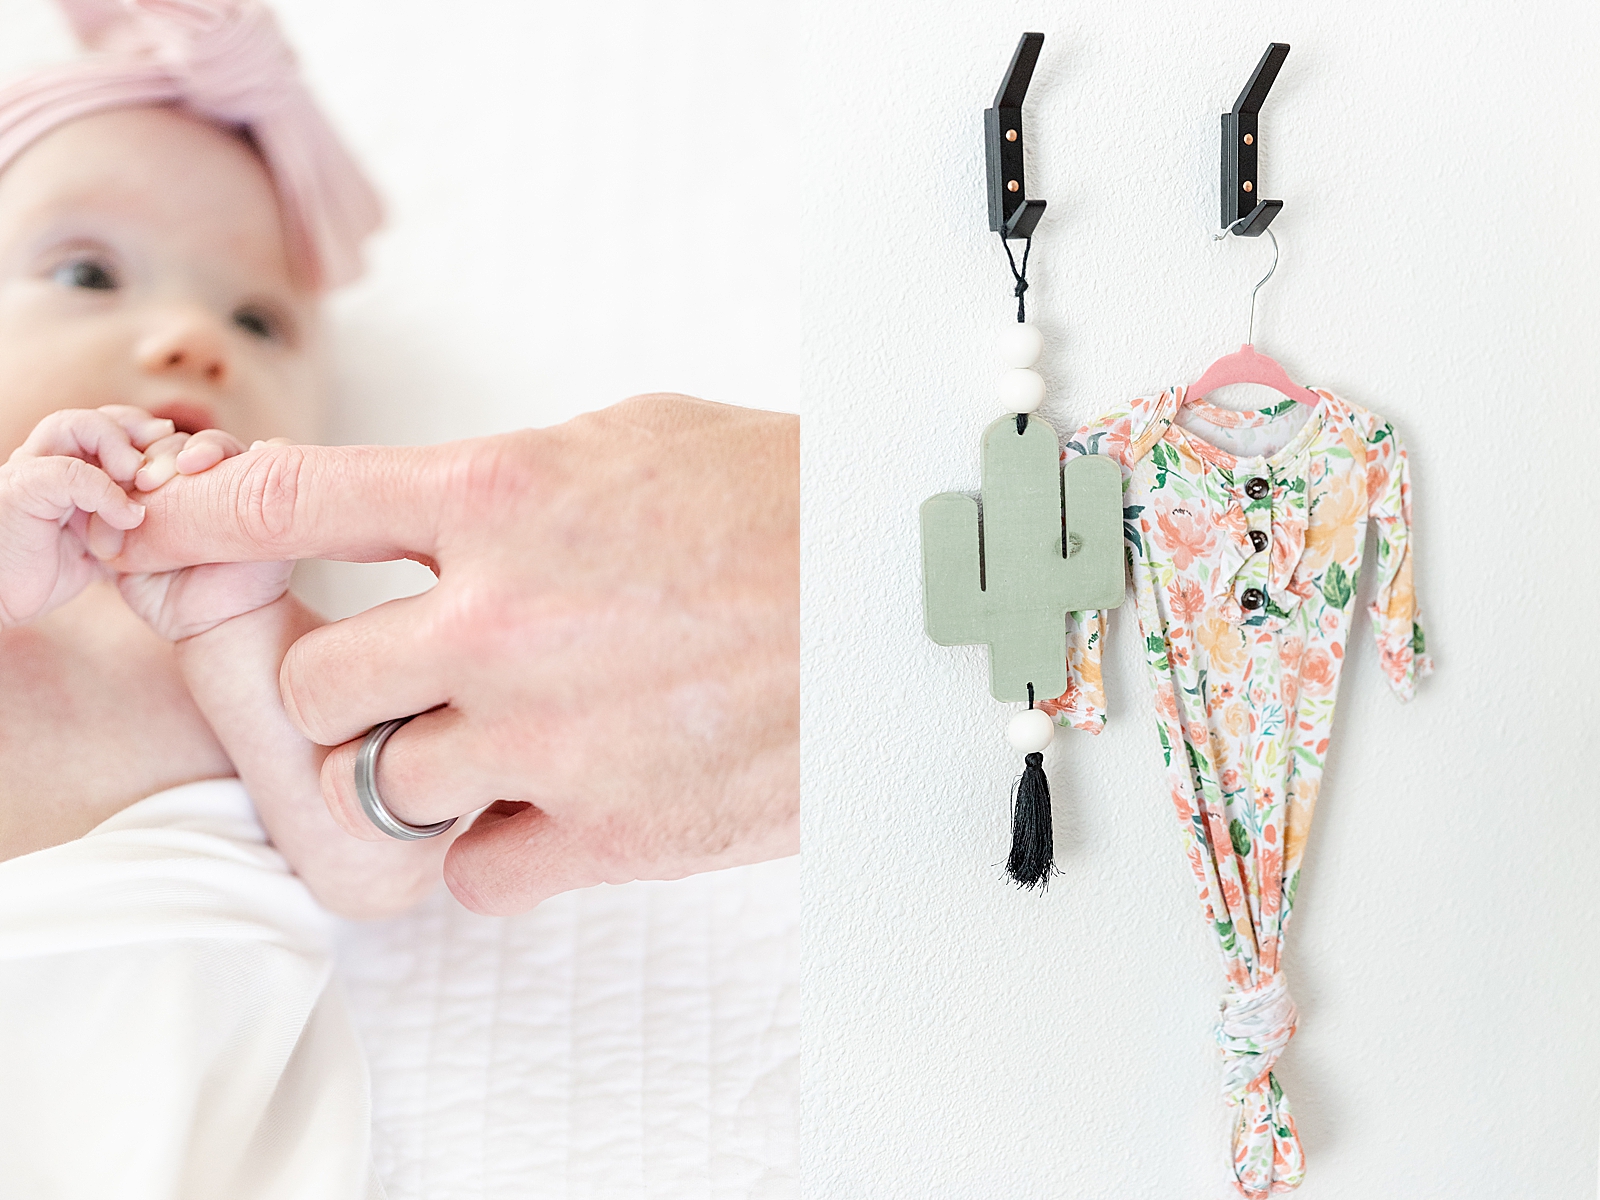 baby holding dads finger with wedding ring in focus with cactus nursery decoration and floral layette